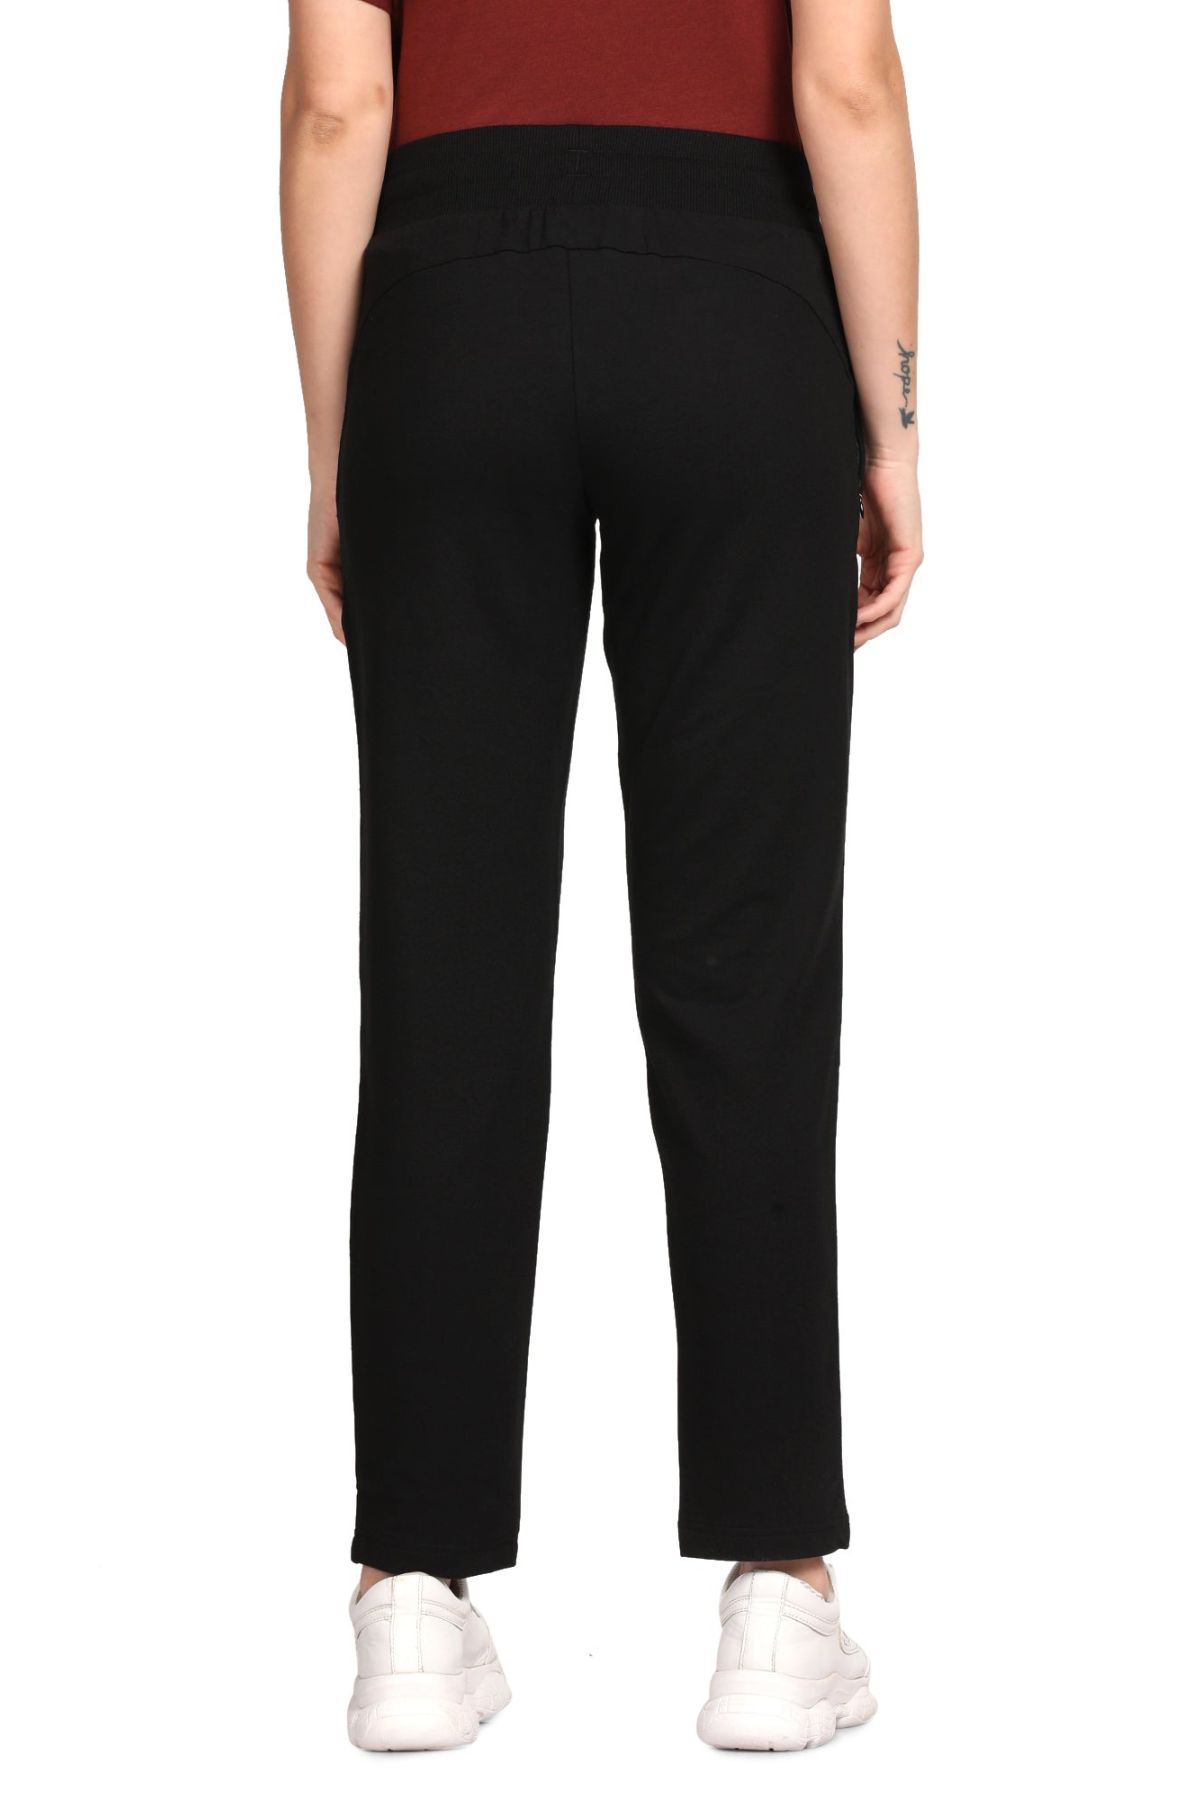 Women's Cool Stretch Lounge Pant made with Organic Cotton | Pact